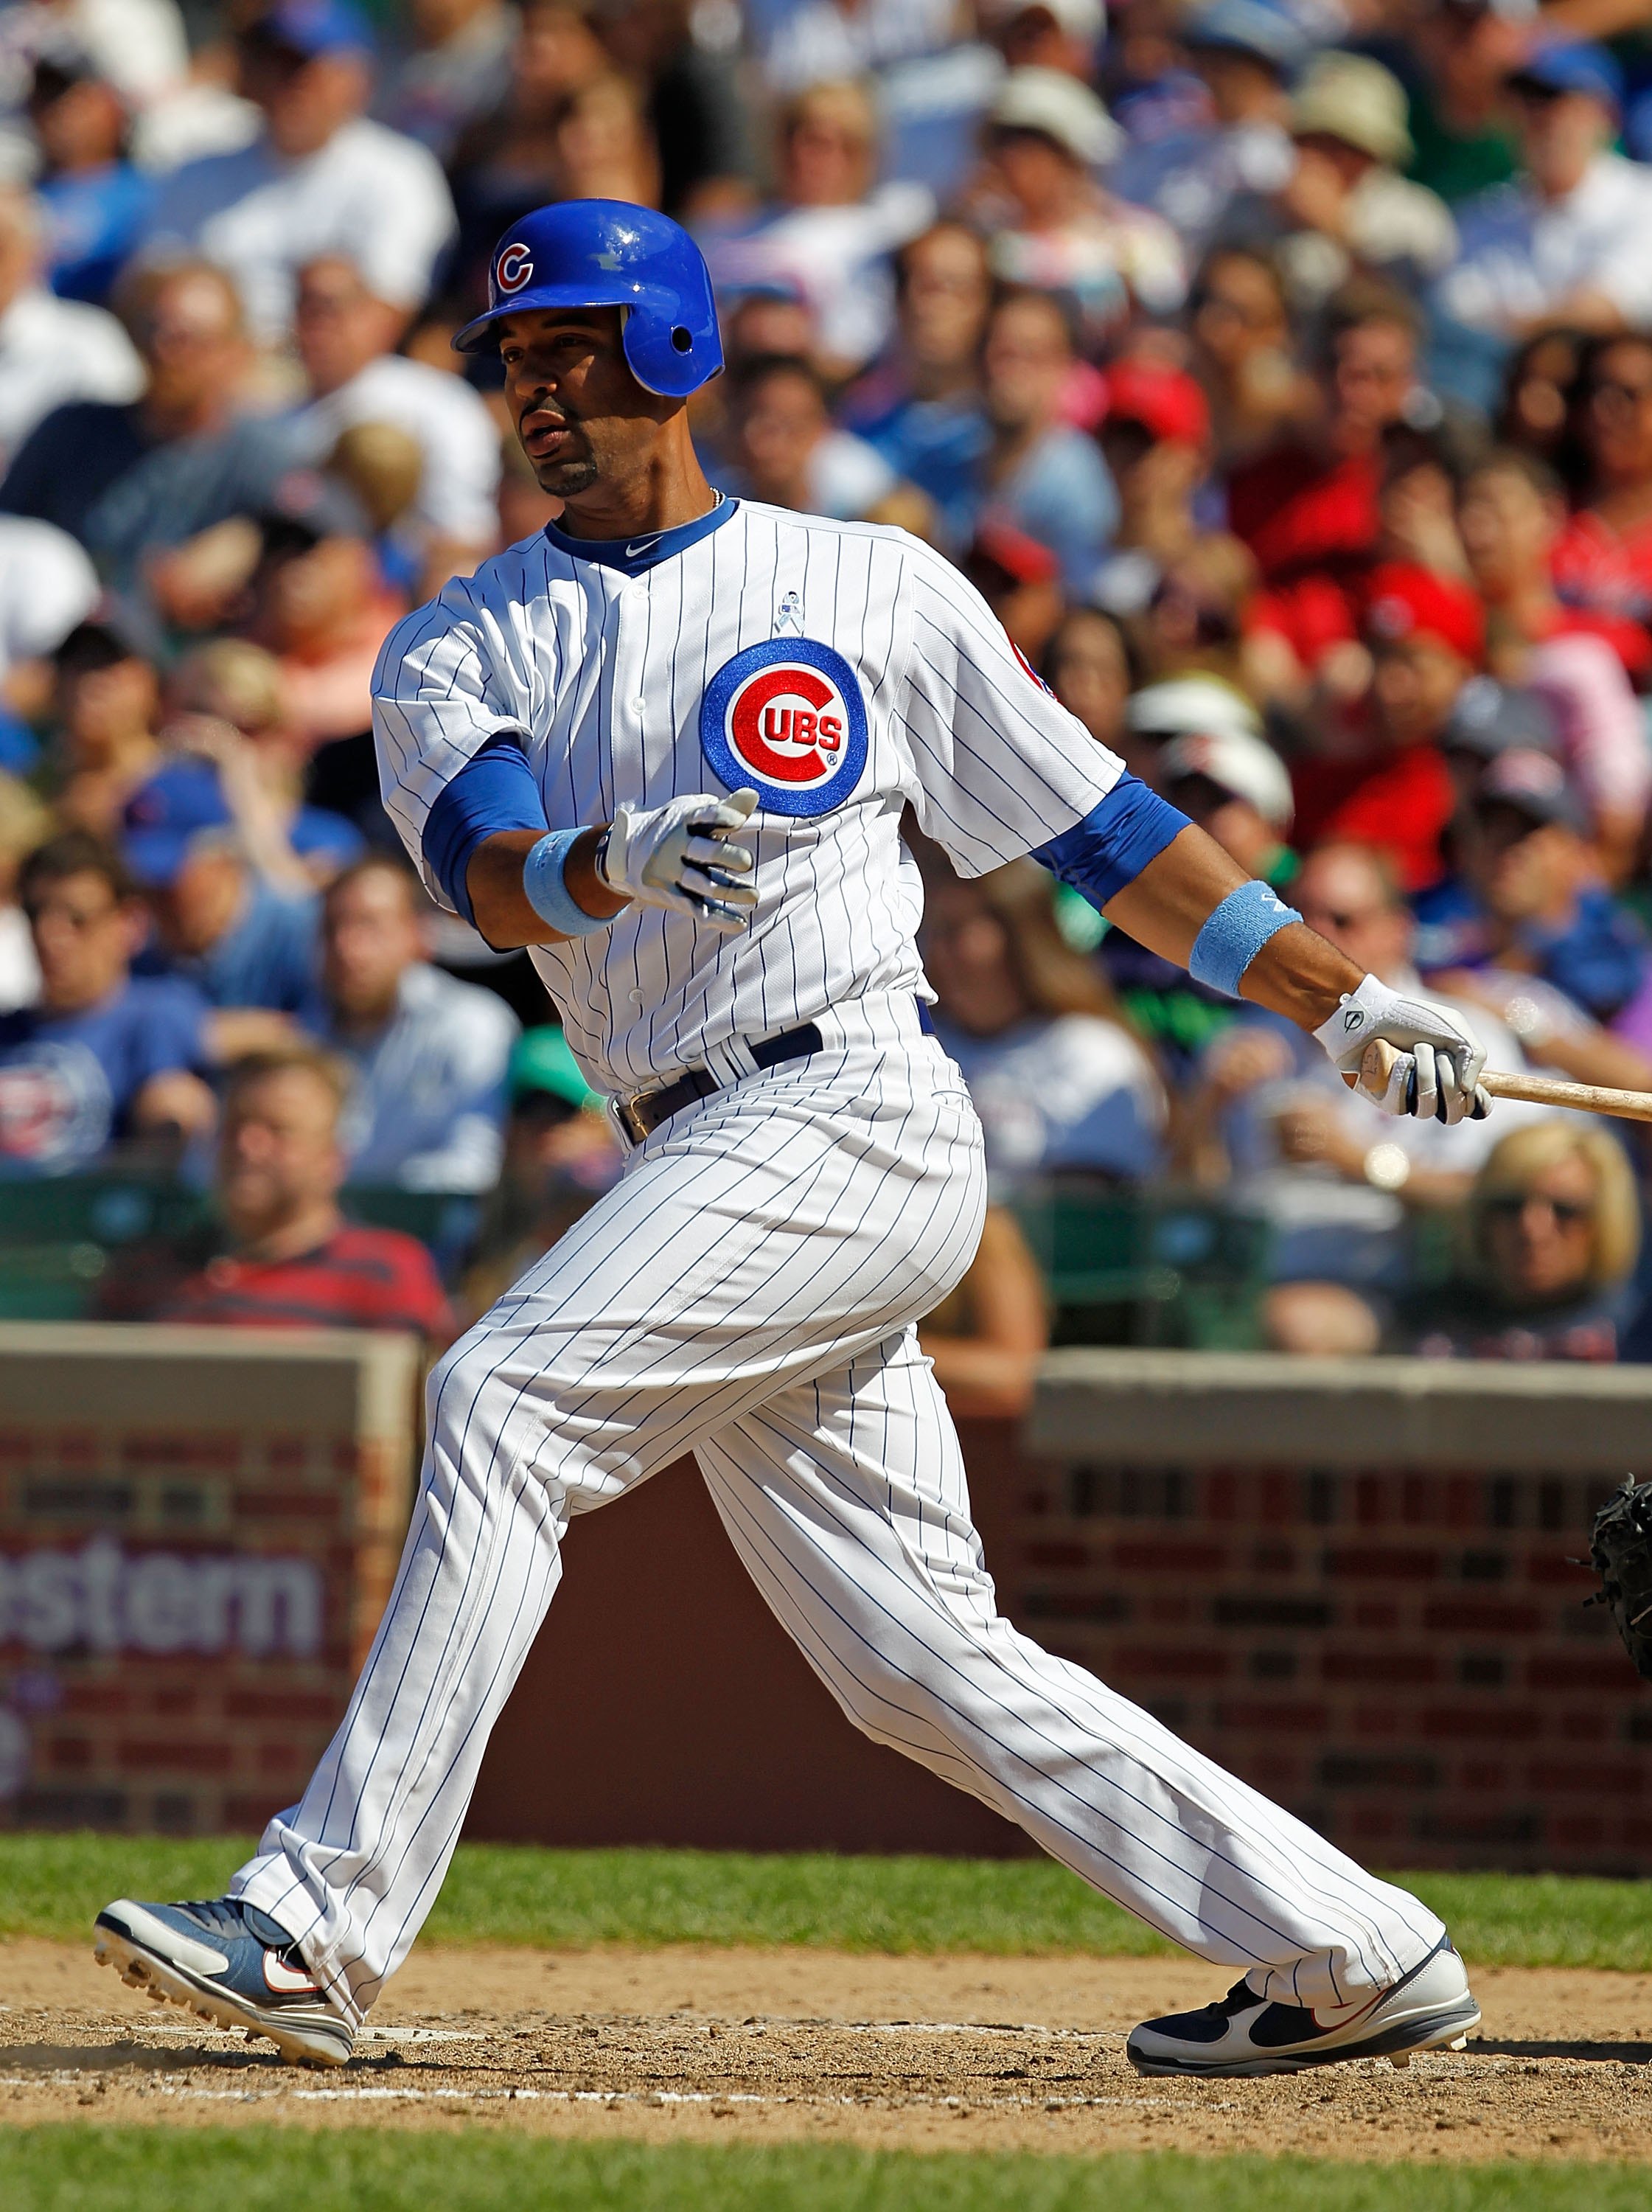 CHICAGO - JUNE 20: Derrek Lee #25 of the Chicago Cubs hits the ball against the Los Angeles Angels of Anaheim at Wrigley Field on June 20, 2010 in Chicago, Illinois. The Cubs defeated the Angels 12-1. (Photo by Jonathan Daniel/Getty Images)